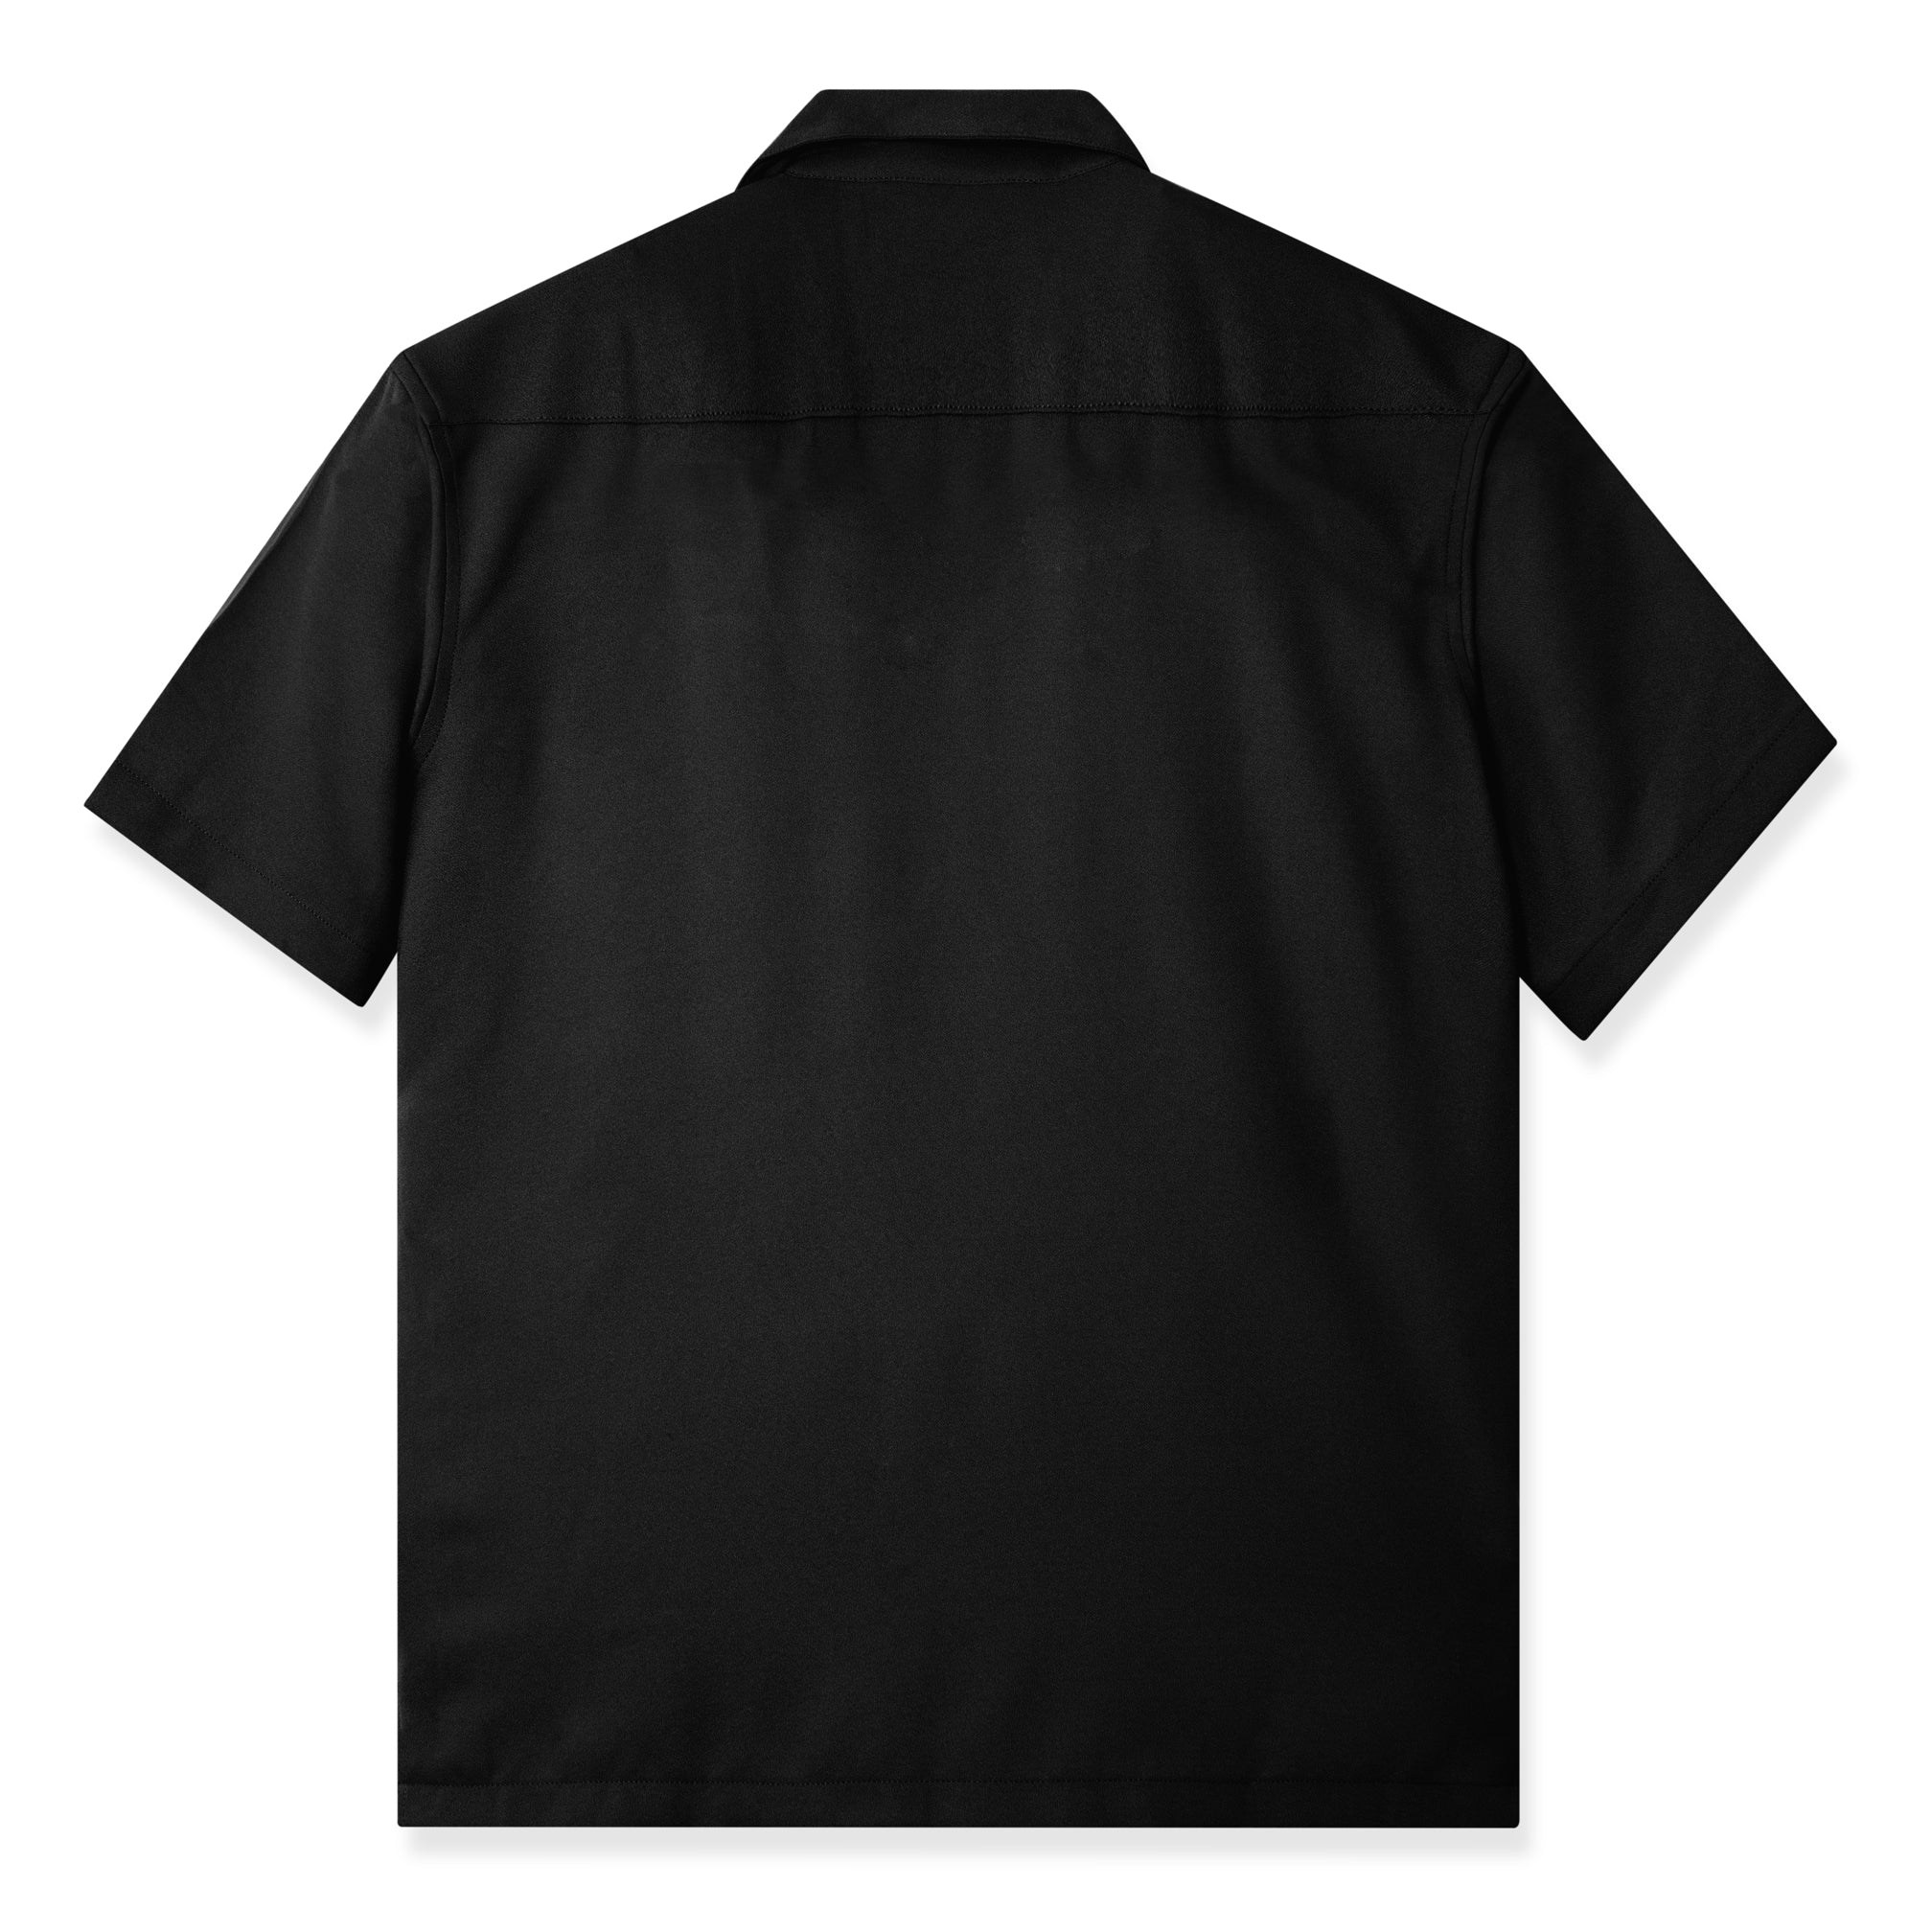 French Ivy Polo Short Sleeve - Black